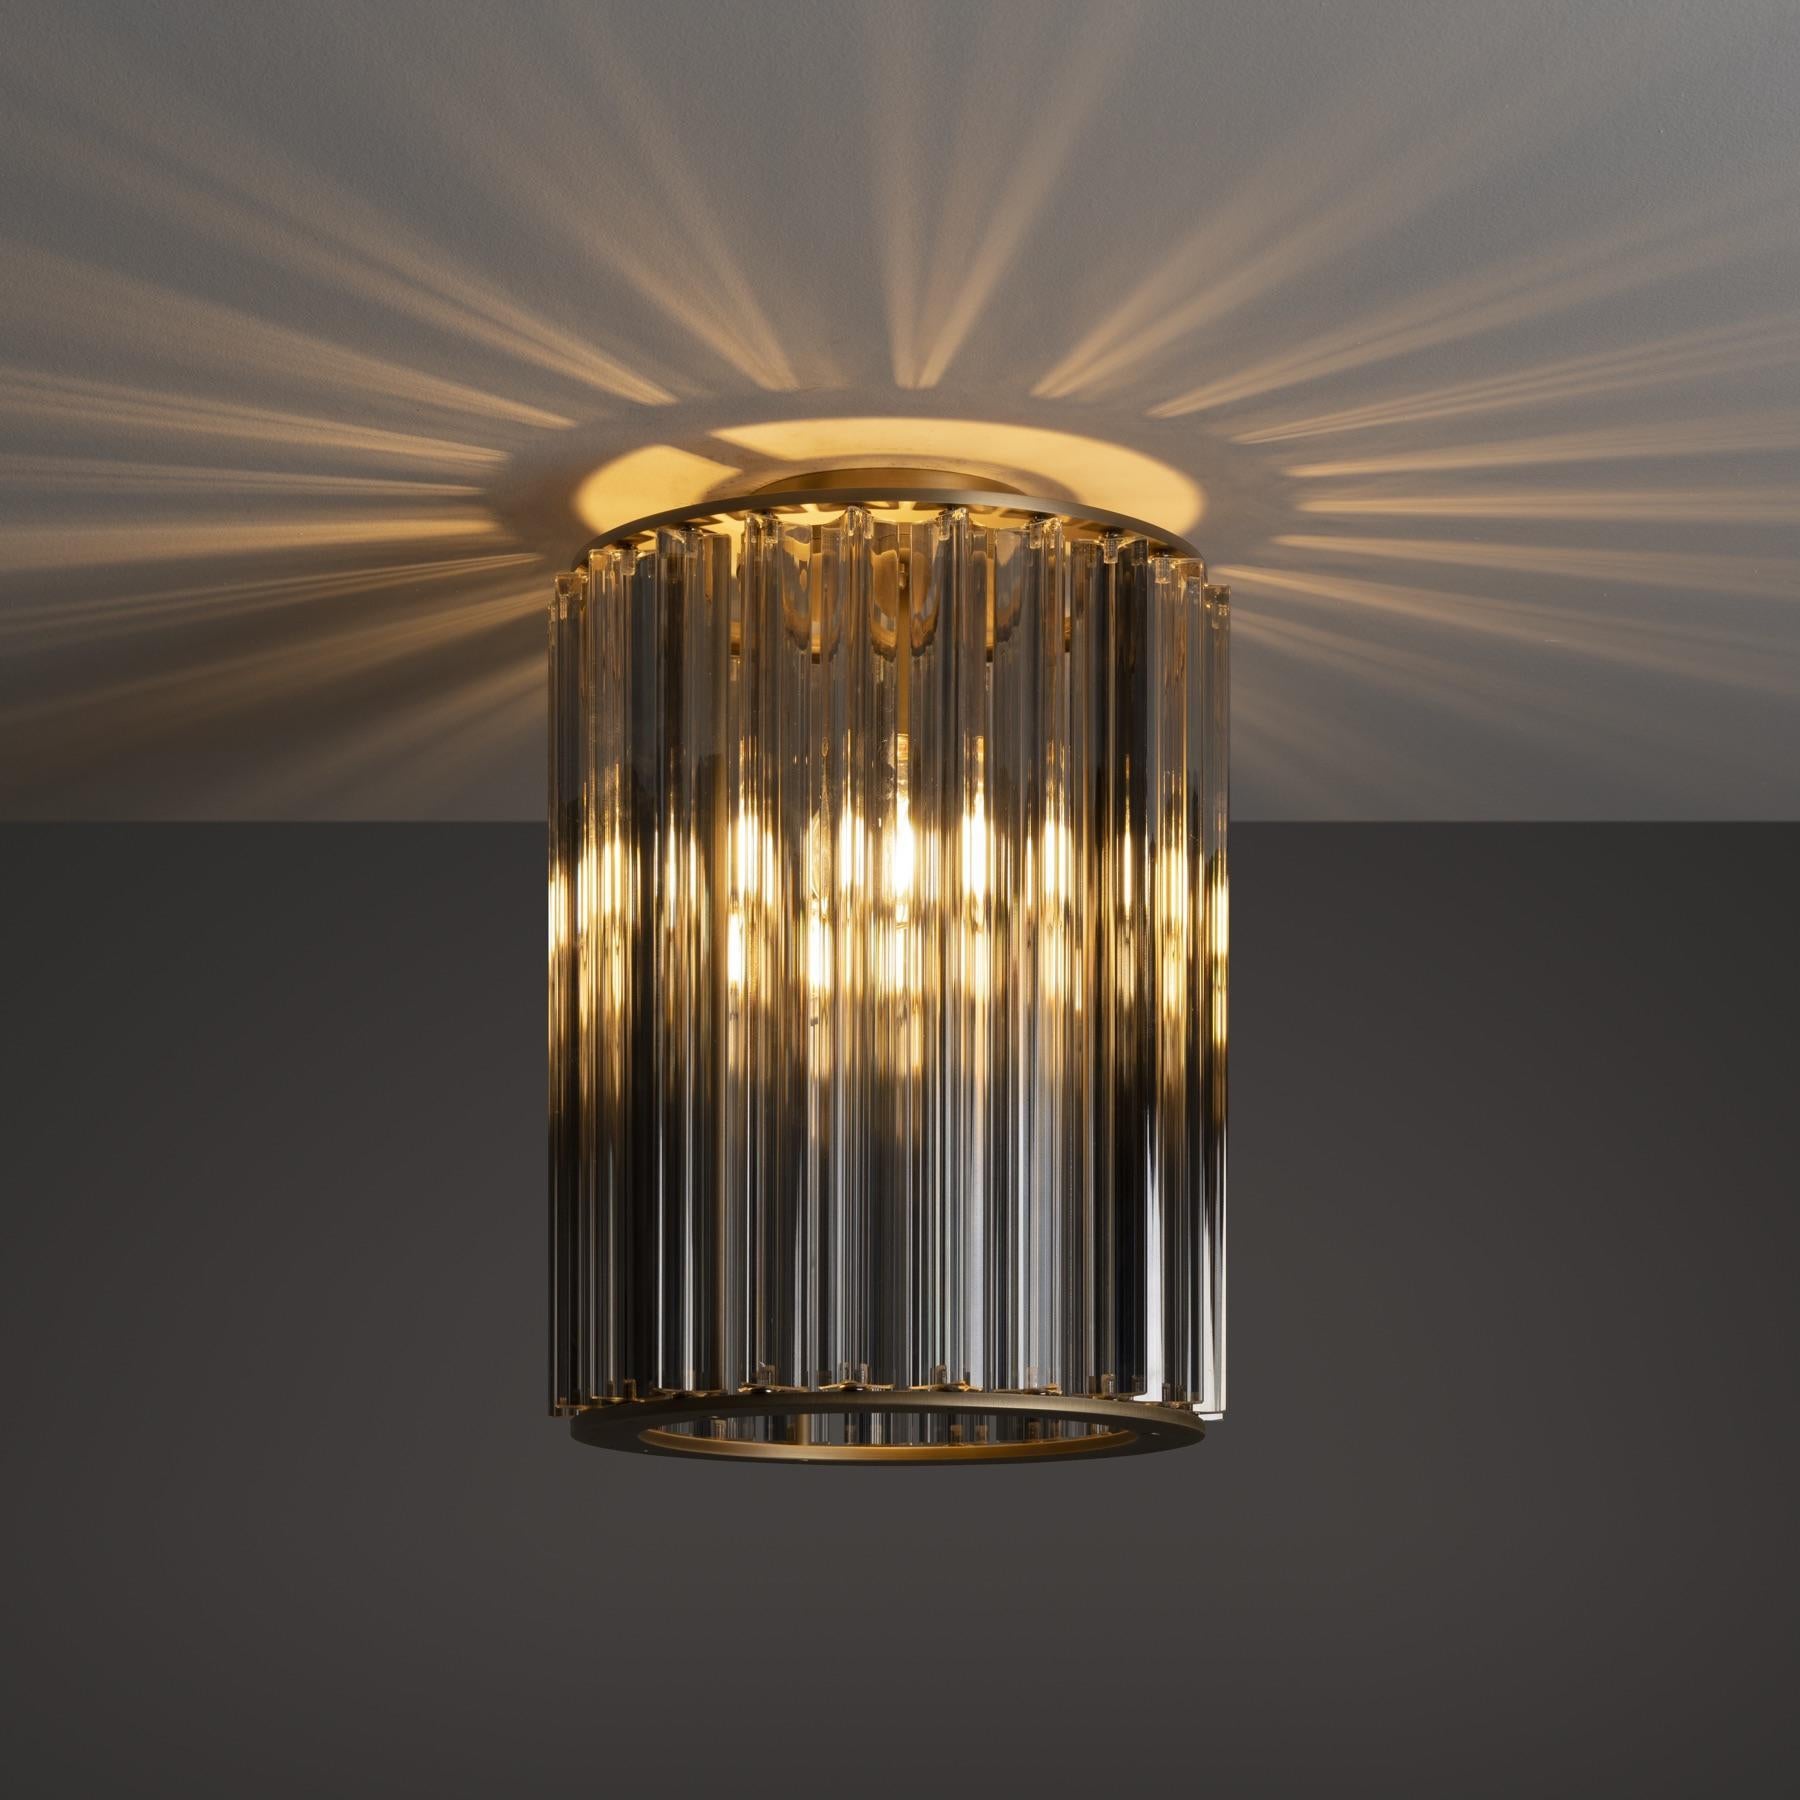 Drawing inspiration from royal crowns, this ceiling mount combines an elegant, burnished brass structure and Murano glass.
These precious and refined materials meld together in perfect proportions to create a design that is both contemporary and